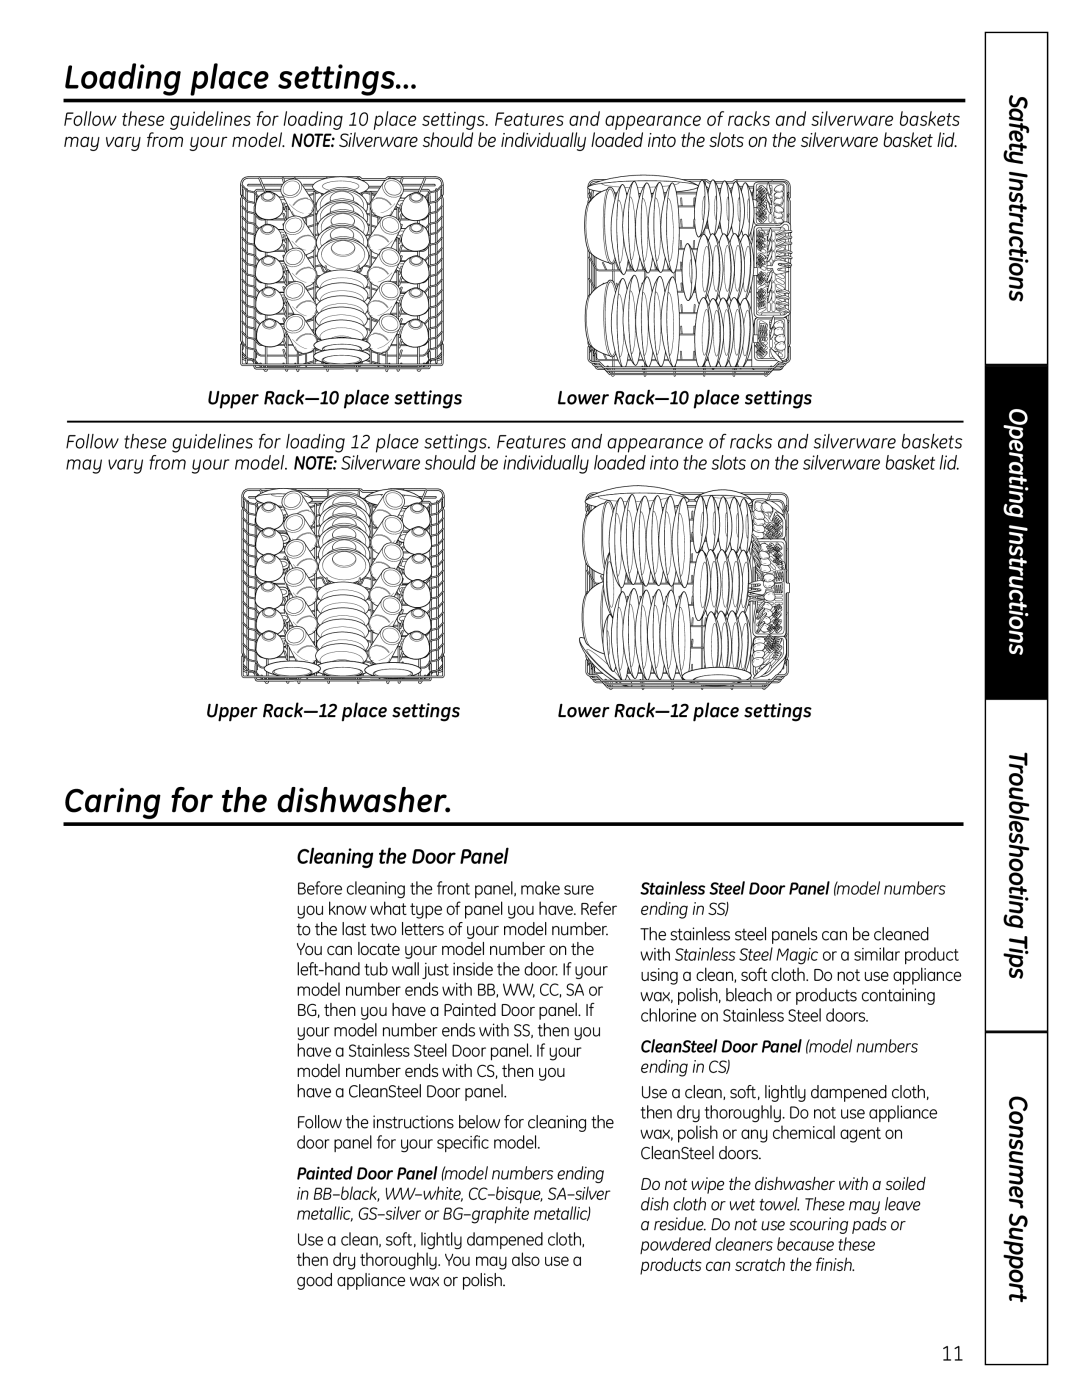 GE GLD6900 Series Loading place settings…, Caring for the dishwasher, Tips Consumer Support, Cleaning the Door Panel 